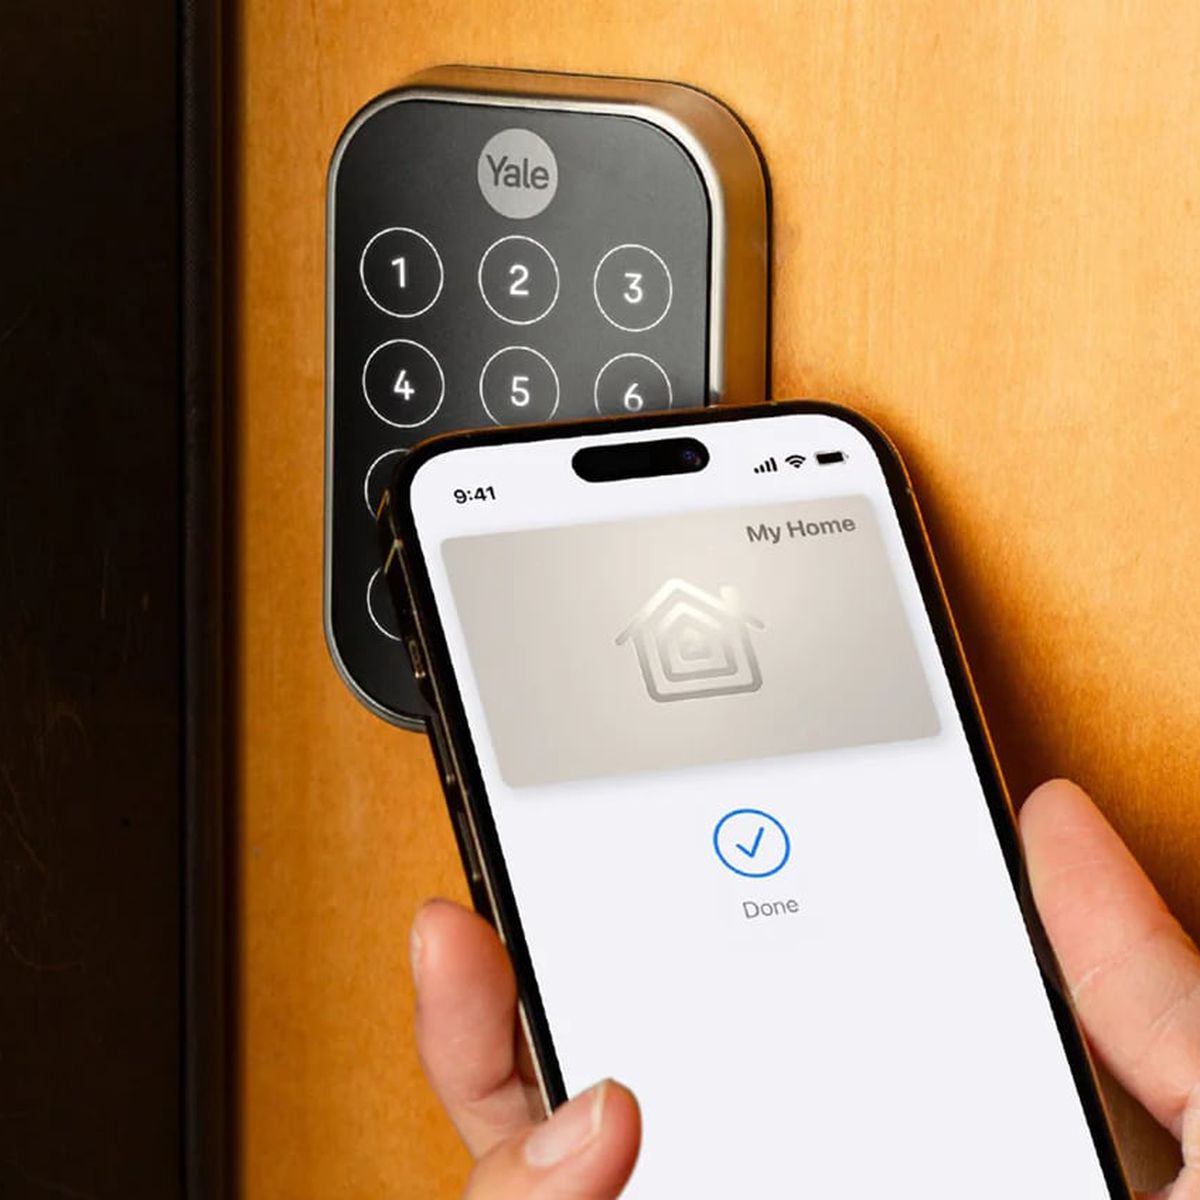 First smart lock to get Matter in Europe, Products